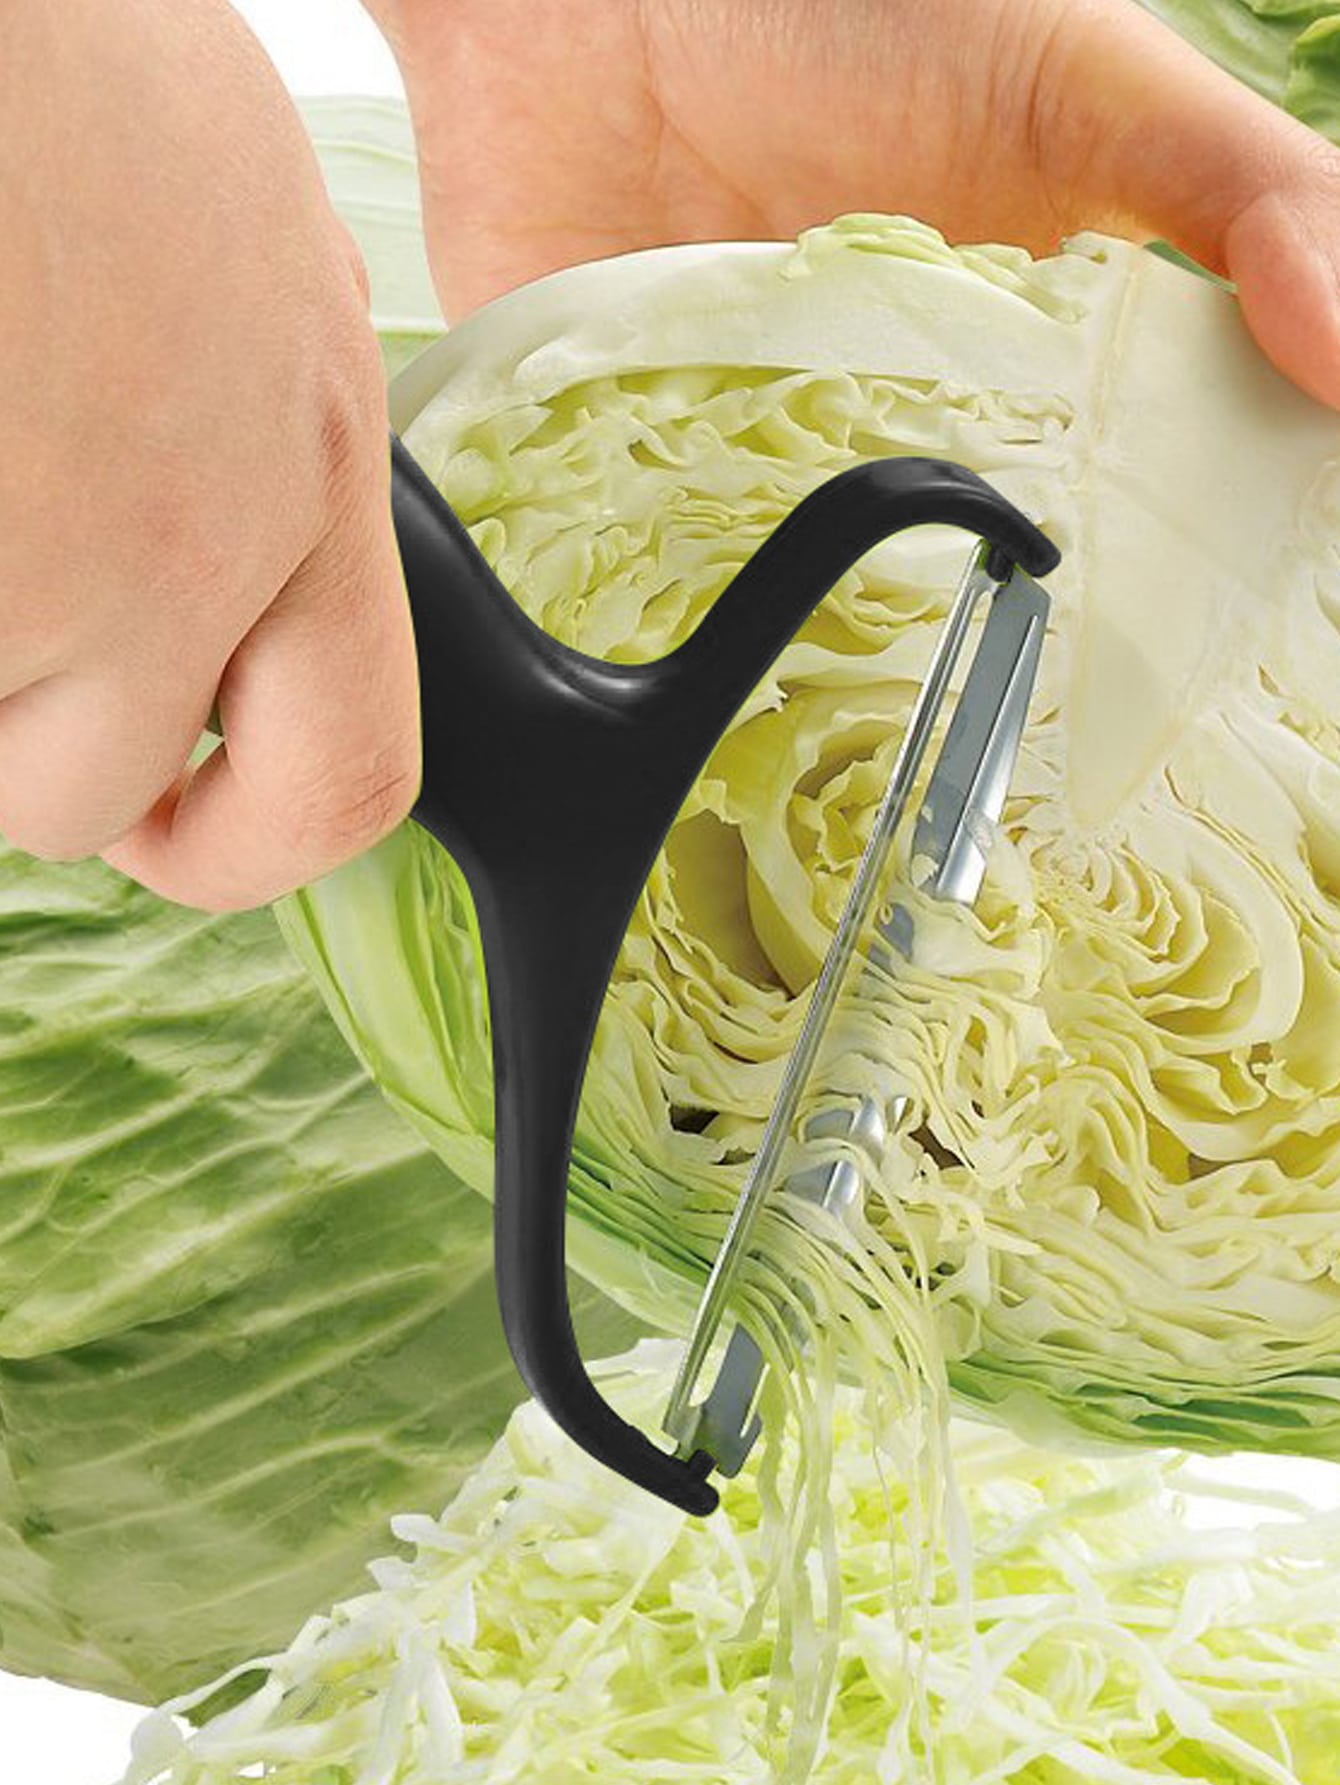 1pc Multifunction Cabbage Grater